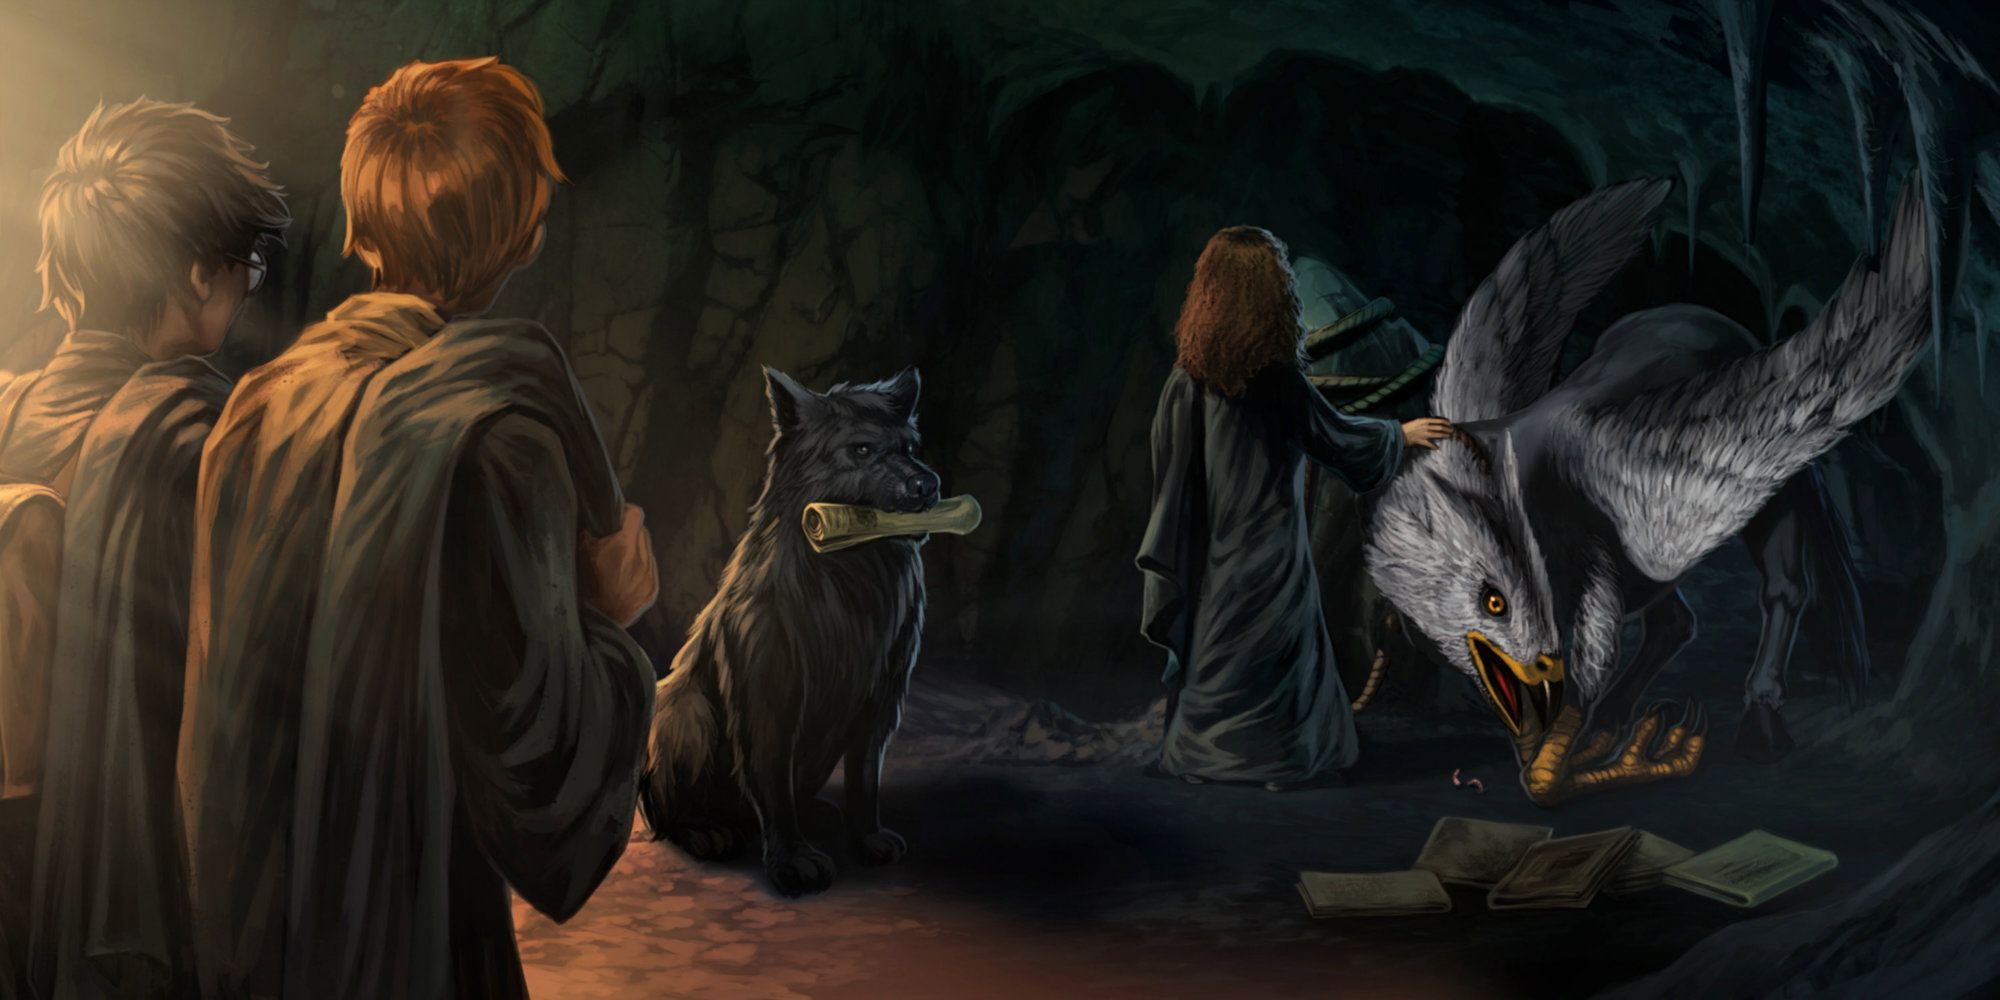 Harry Ron and Hermione visit Sirius and Buckbeak in an illustrated version of the scene